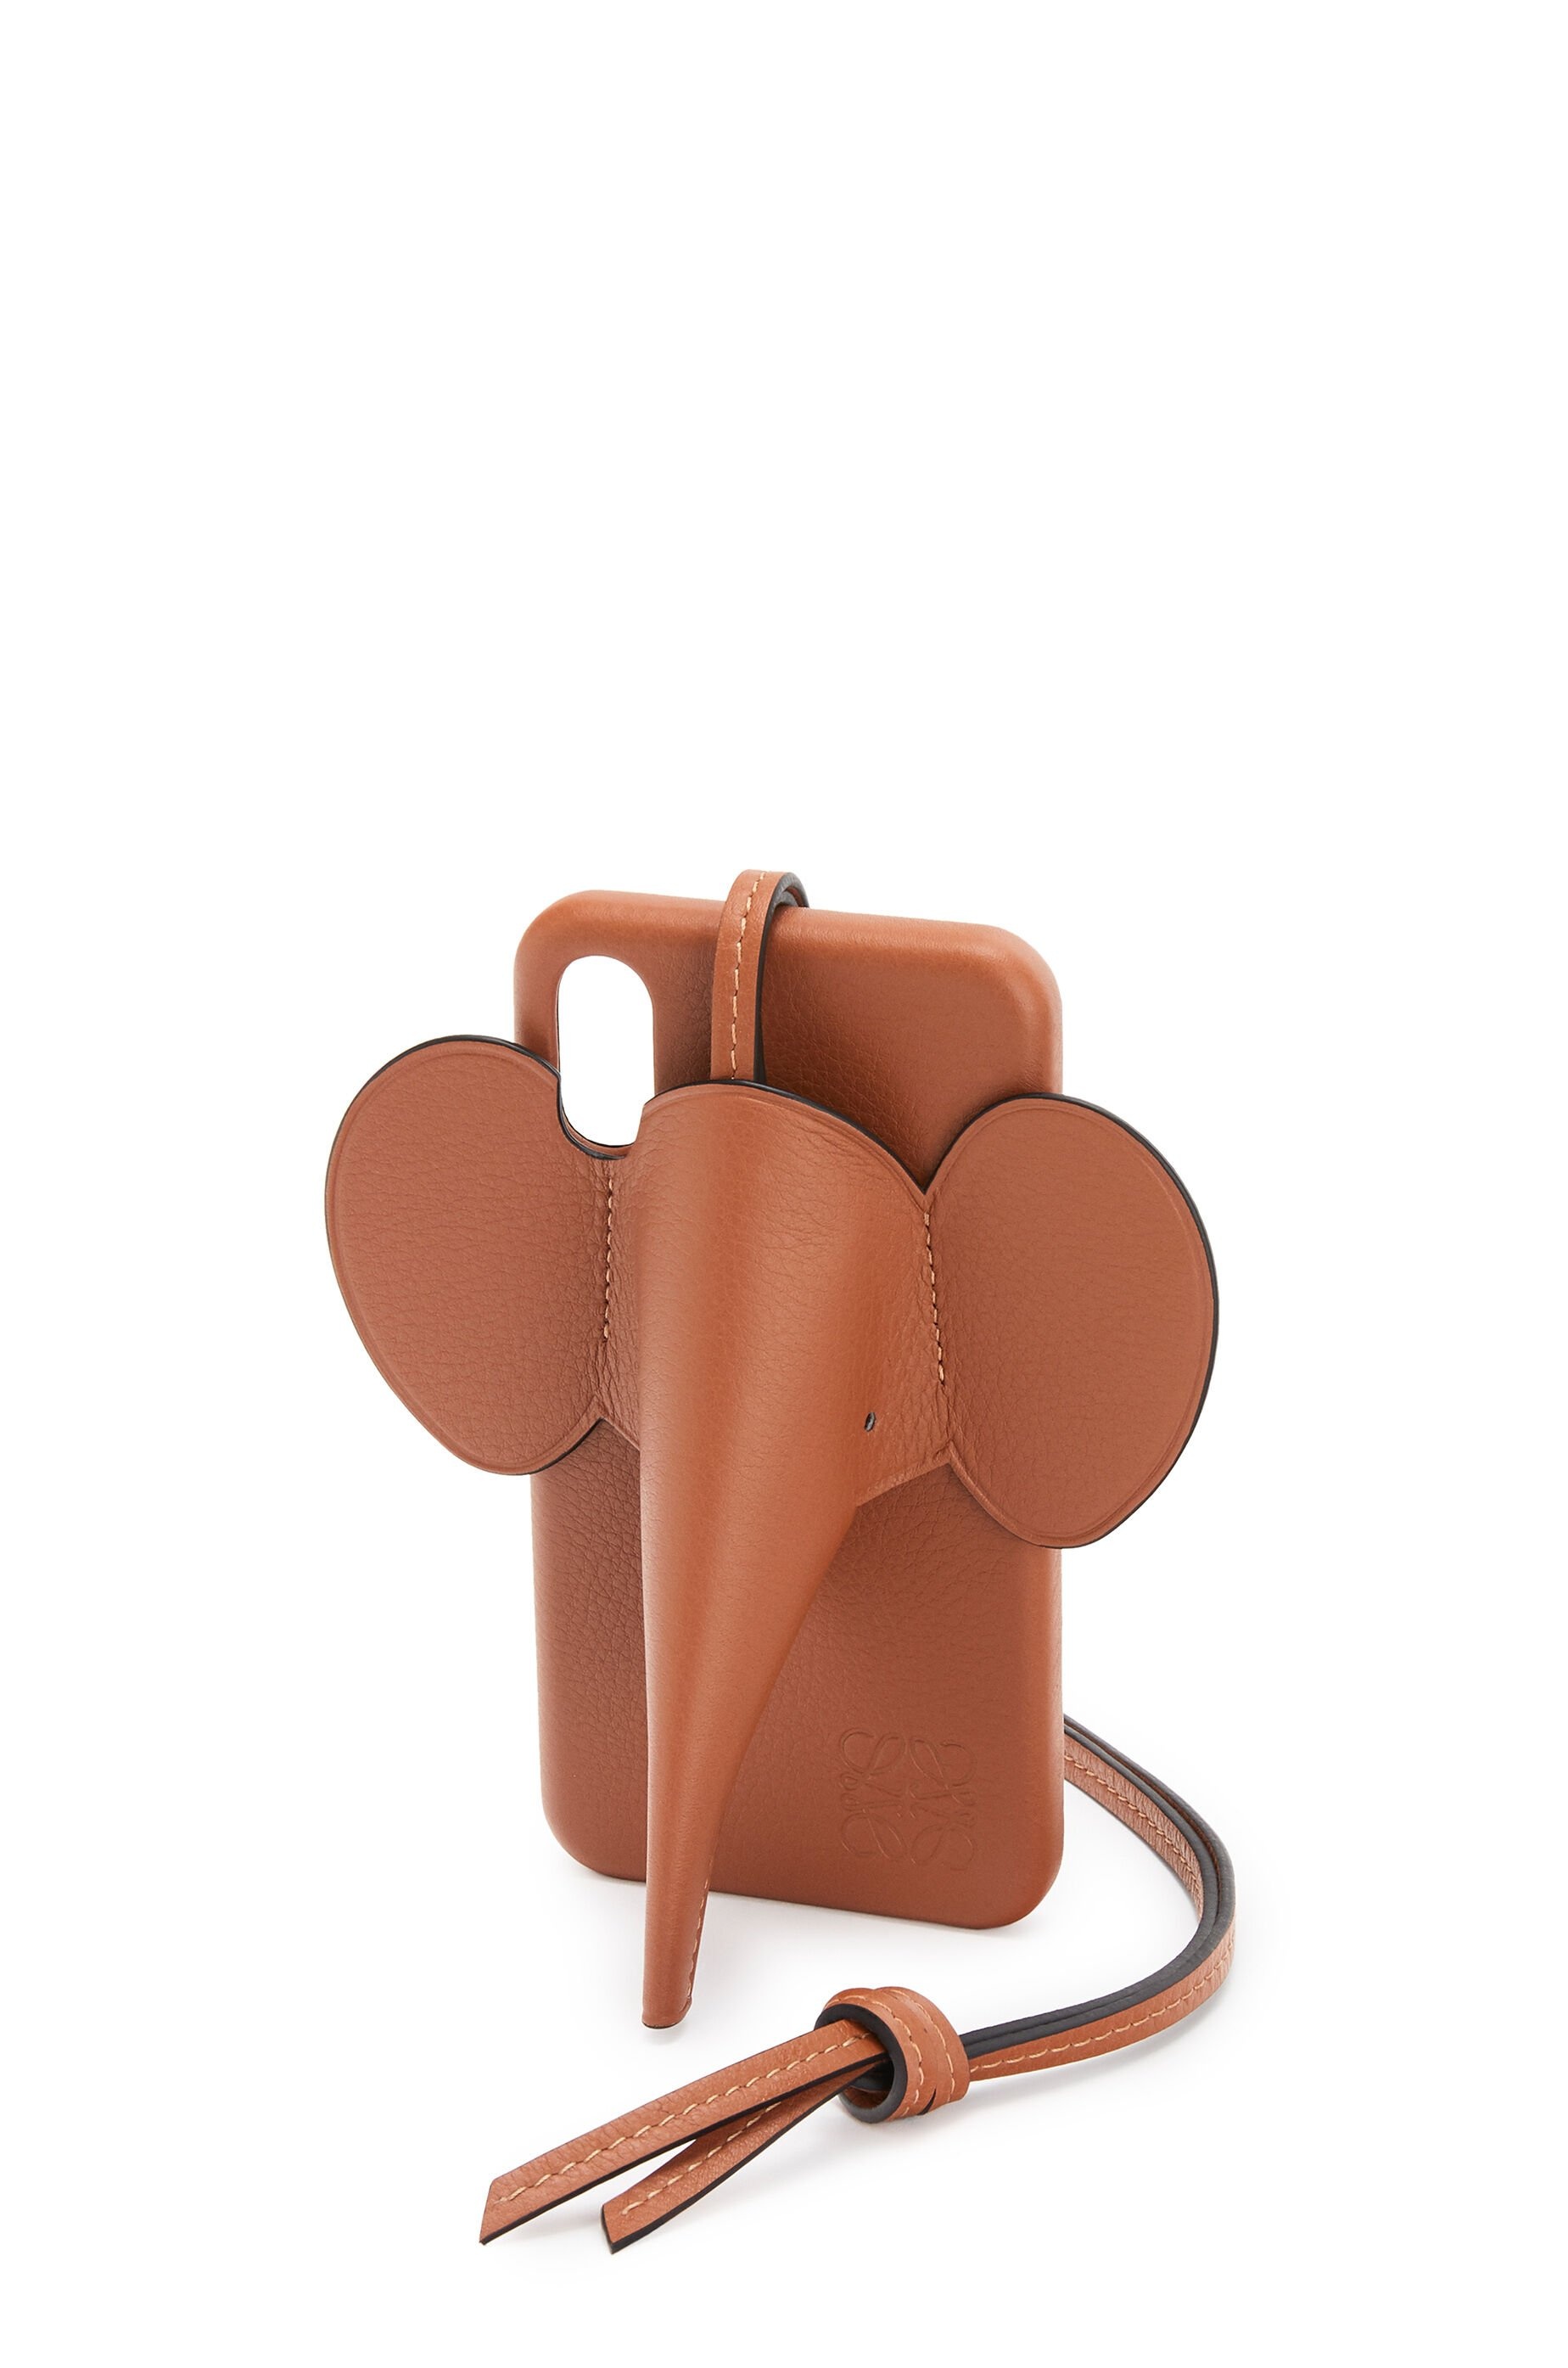 Elephant cover for iPhone X/XS in classic calfskin - 2